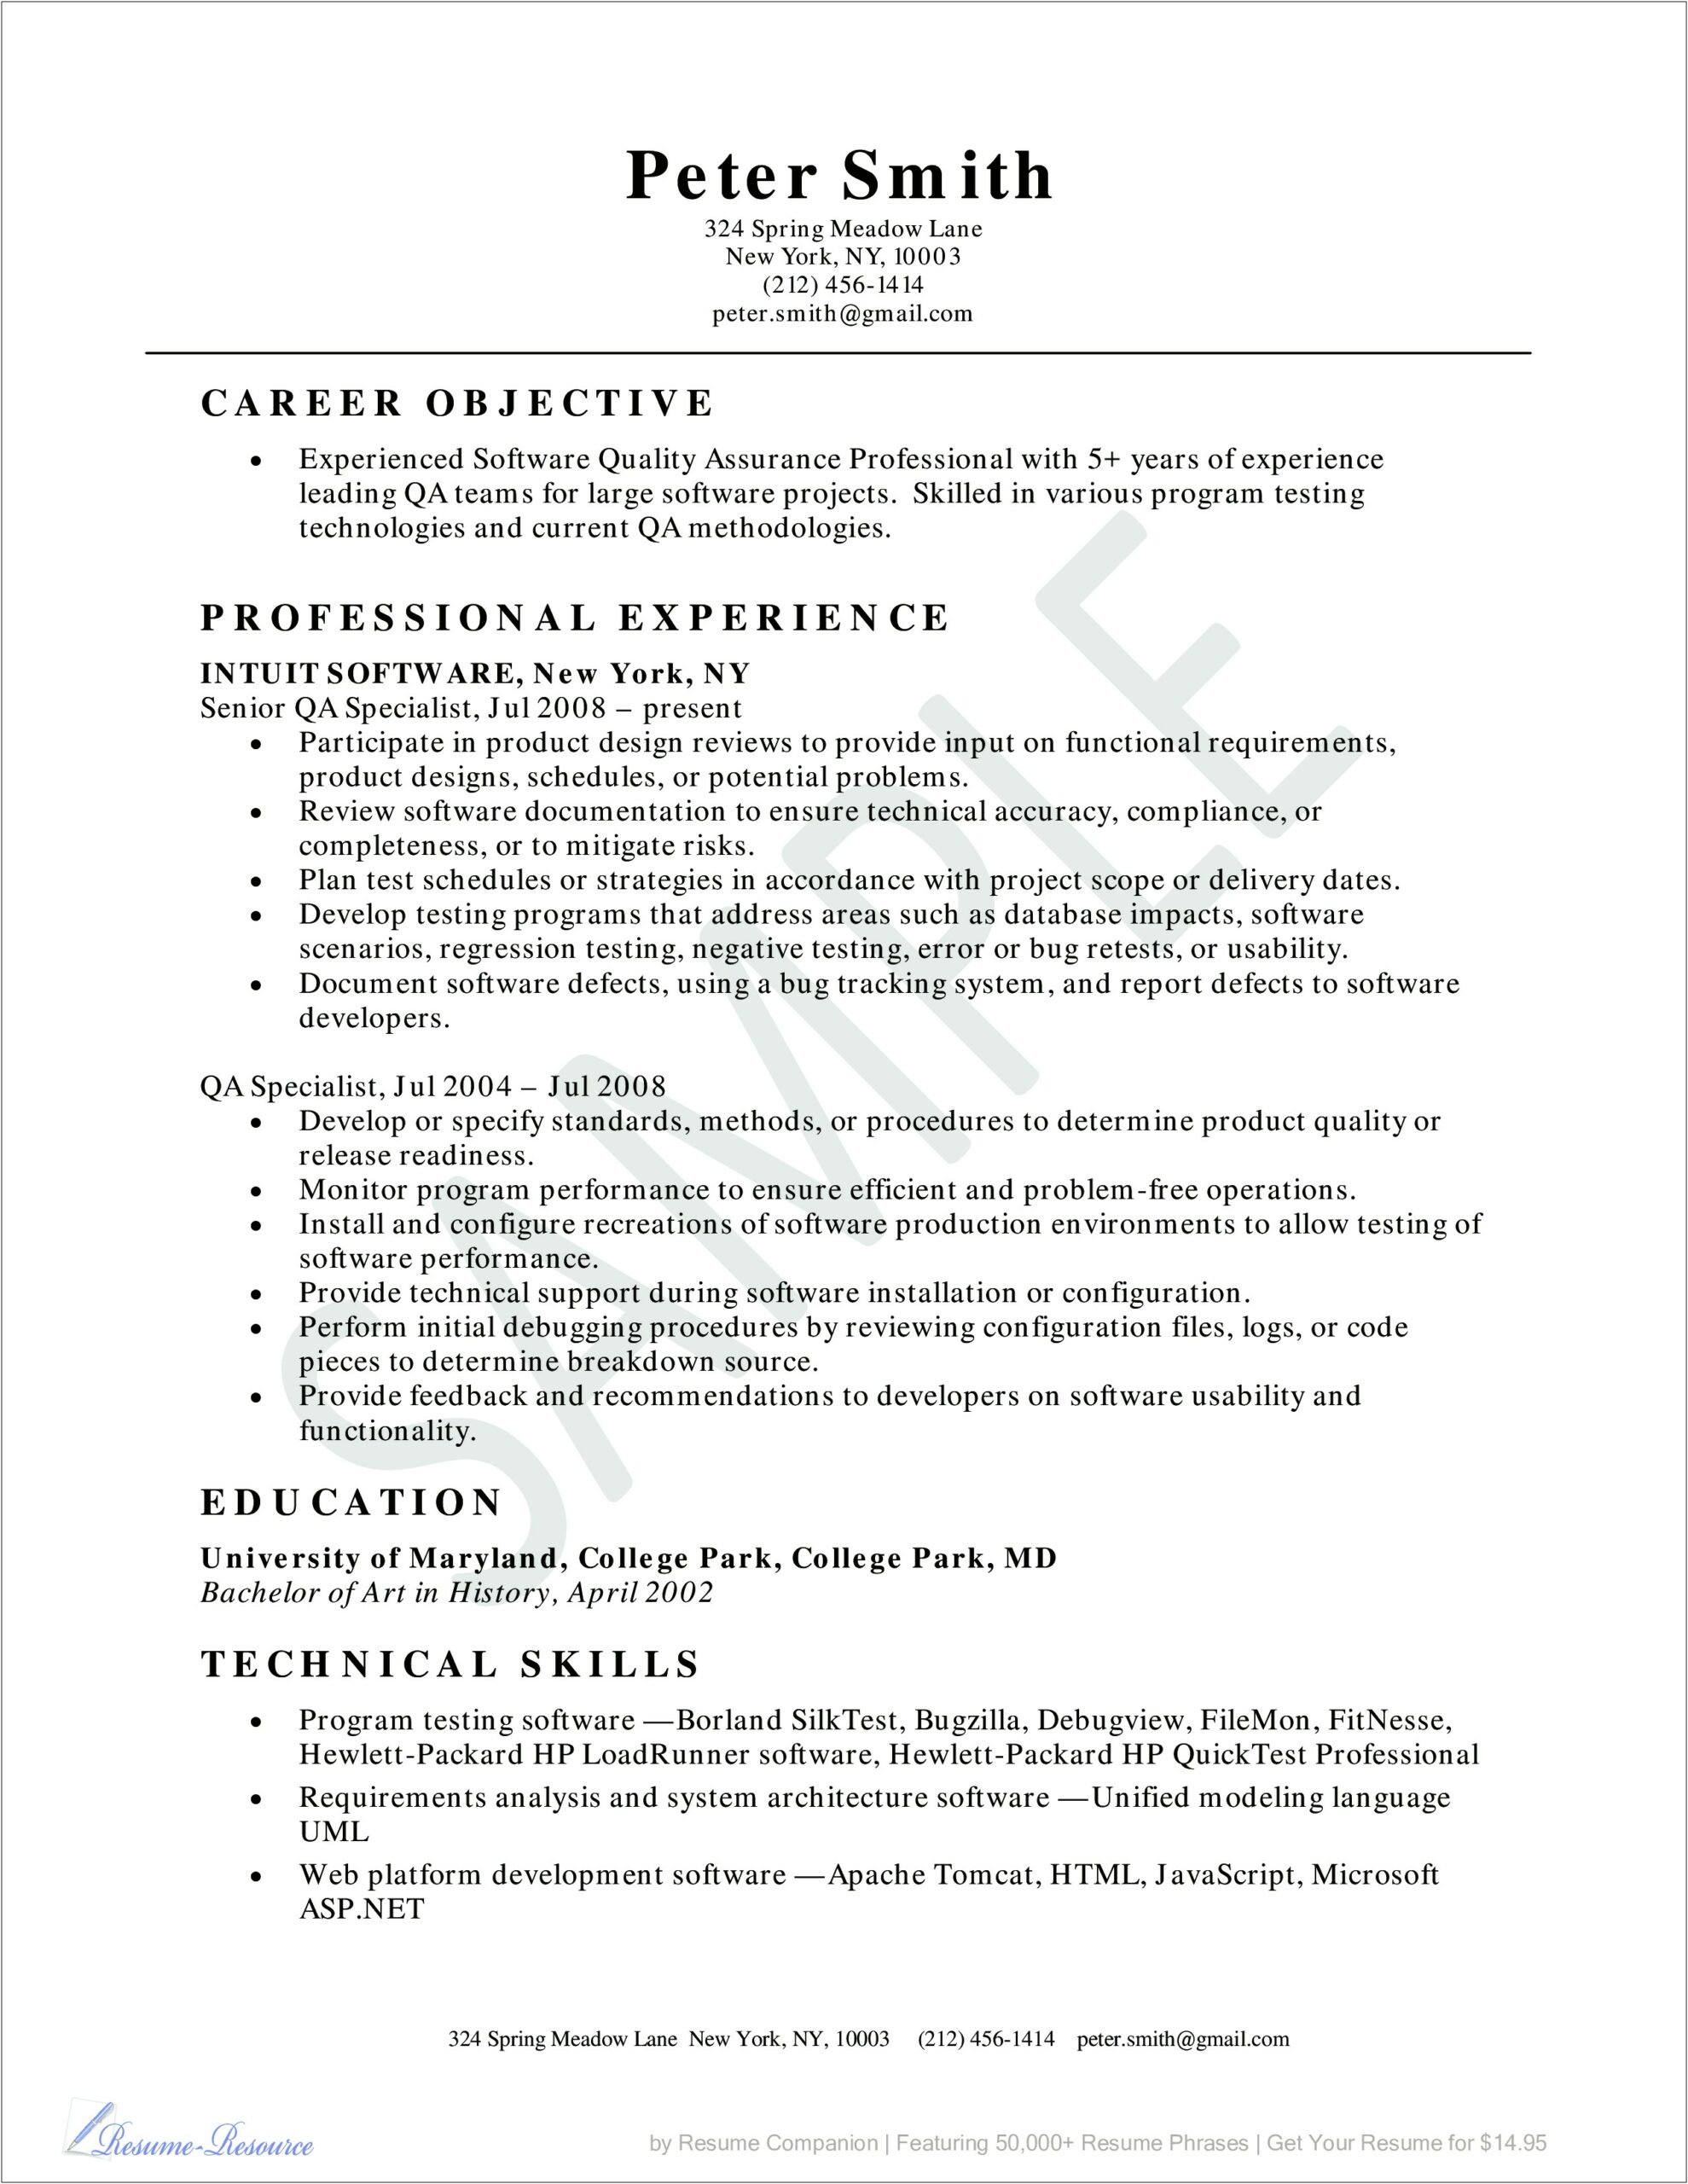 Resume Objective For Software Architect